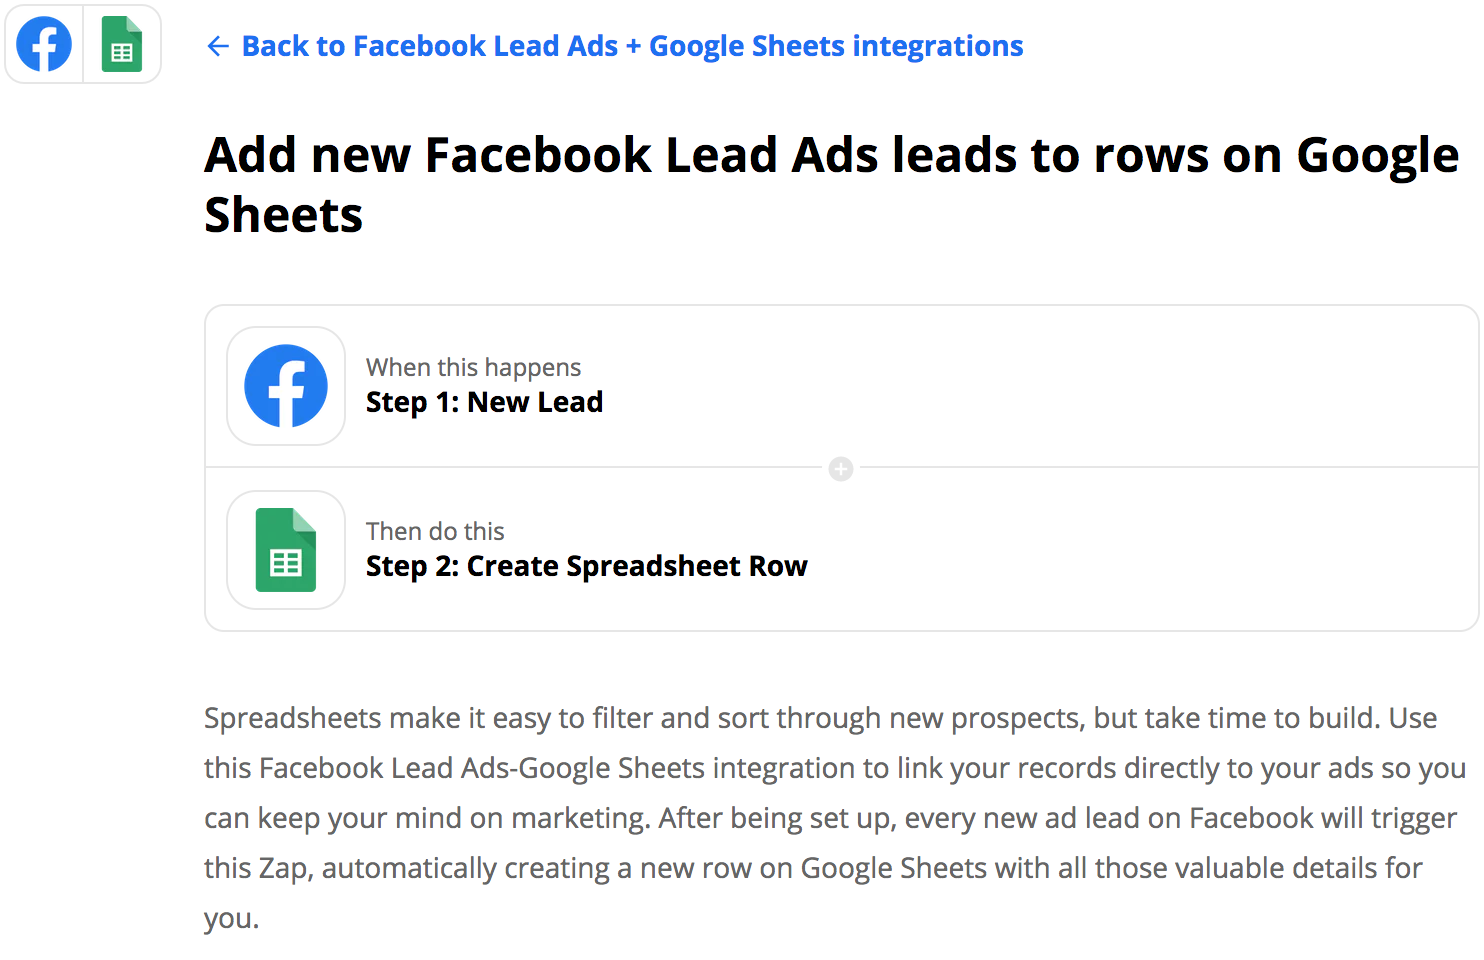 New Facebook Lead Ads leads to row